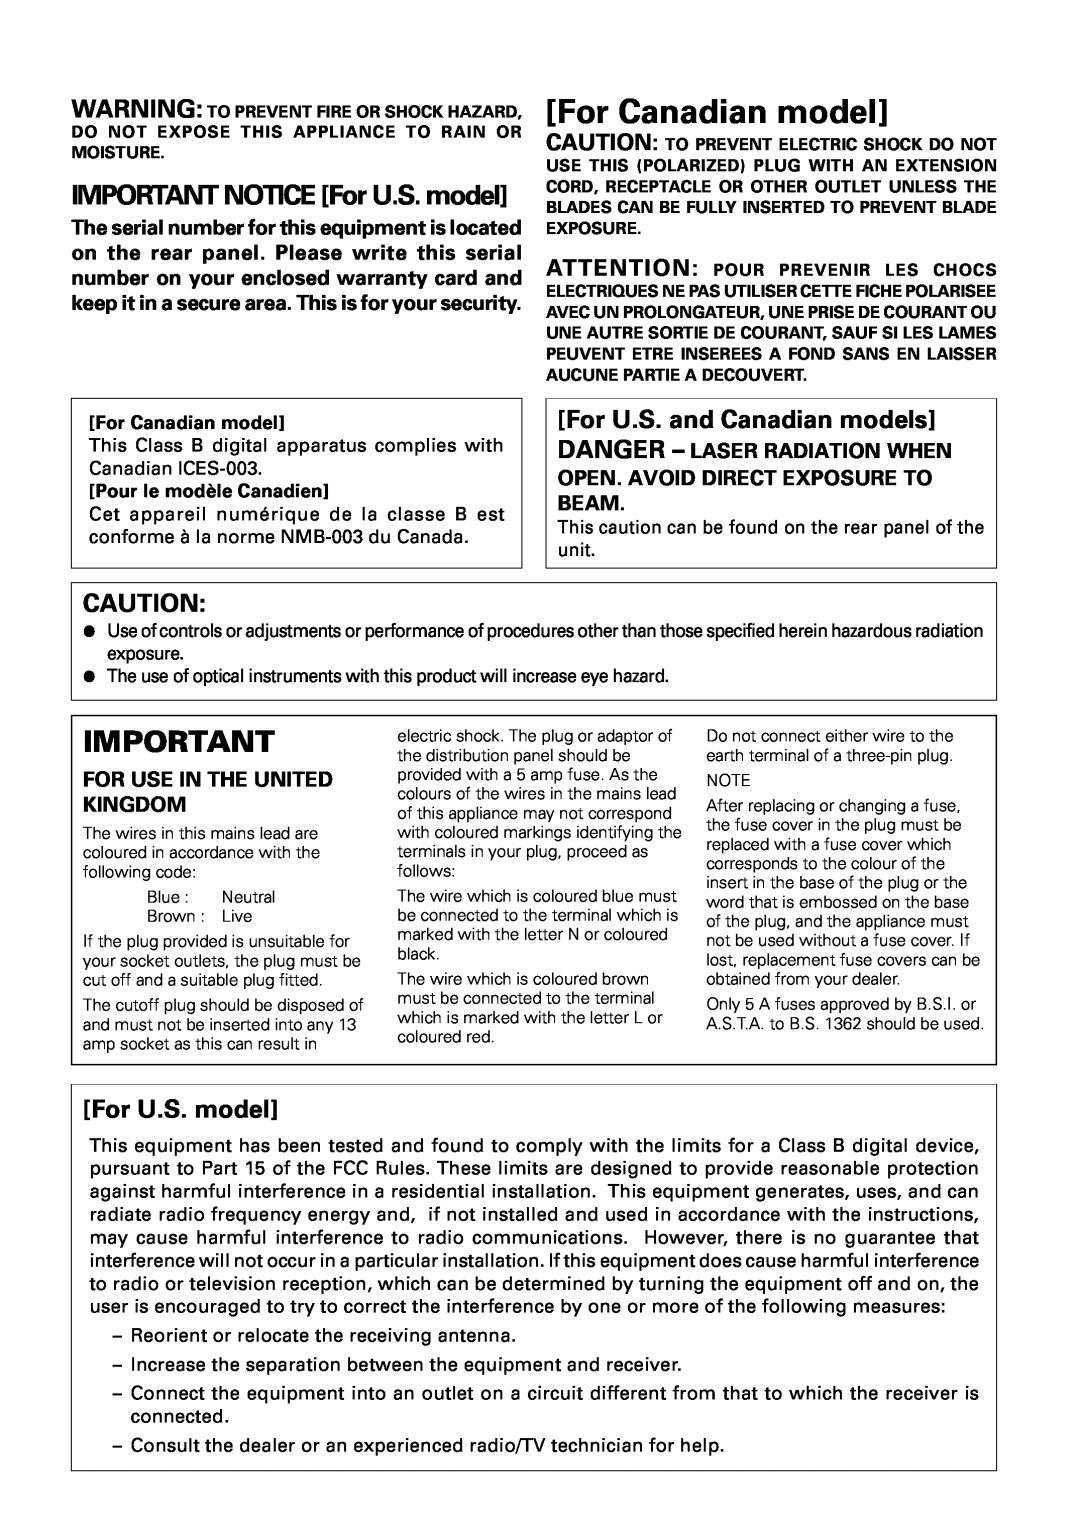 Pioneer PDR-W739 manual For Canadian model, IMPORTANT NOTICE For U.S. model, For U.S. and Canadian models 